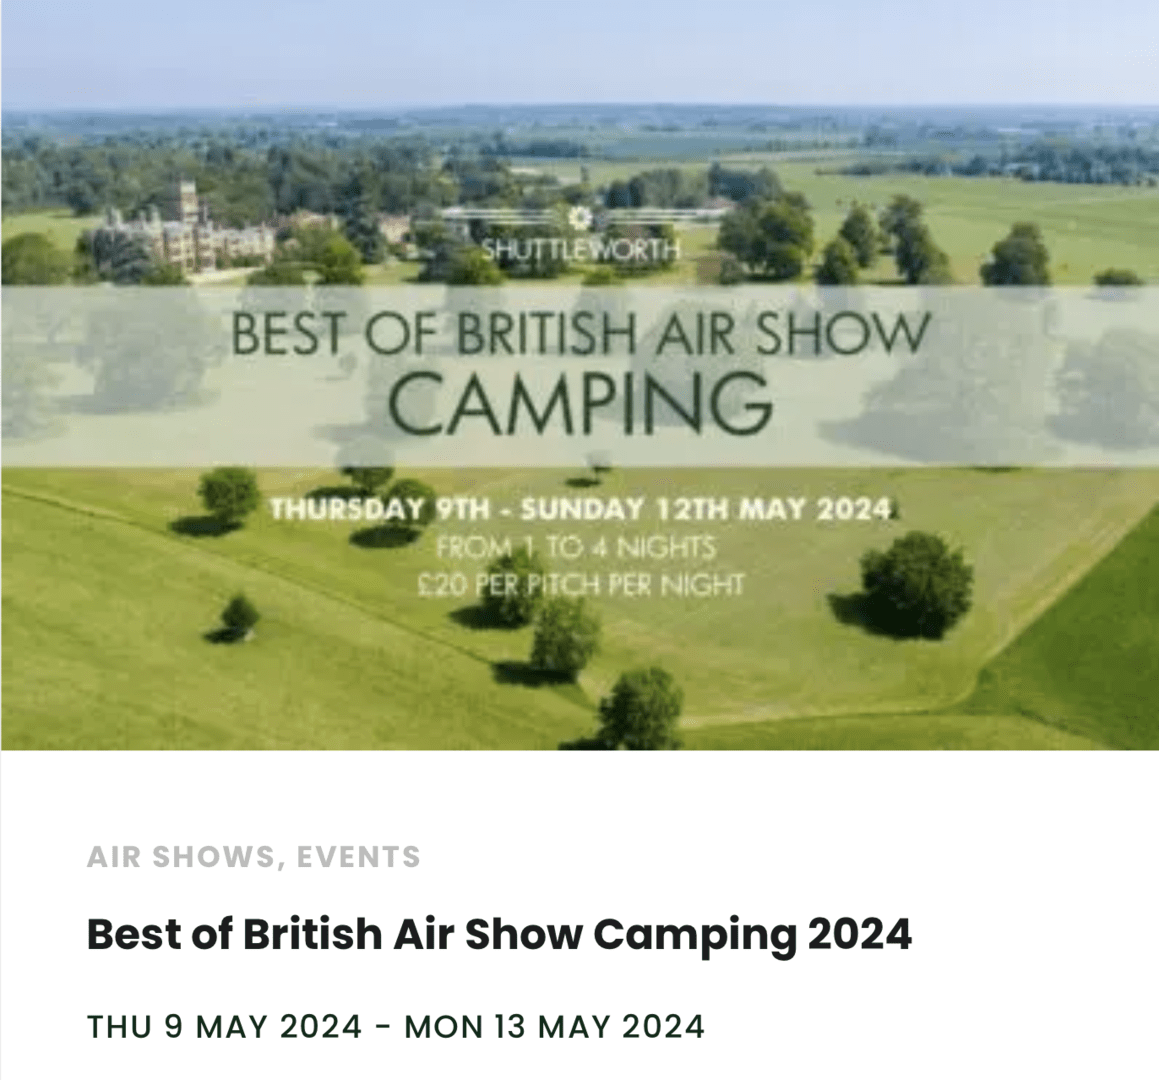 best-of-british-air-show-camping-2024-9-12-mei